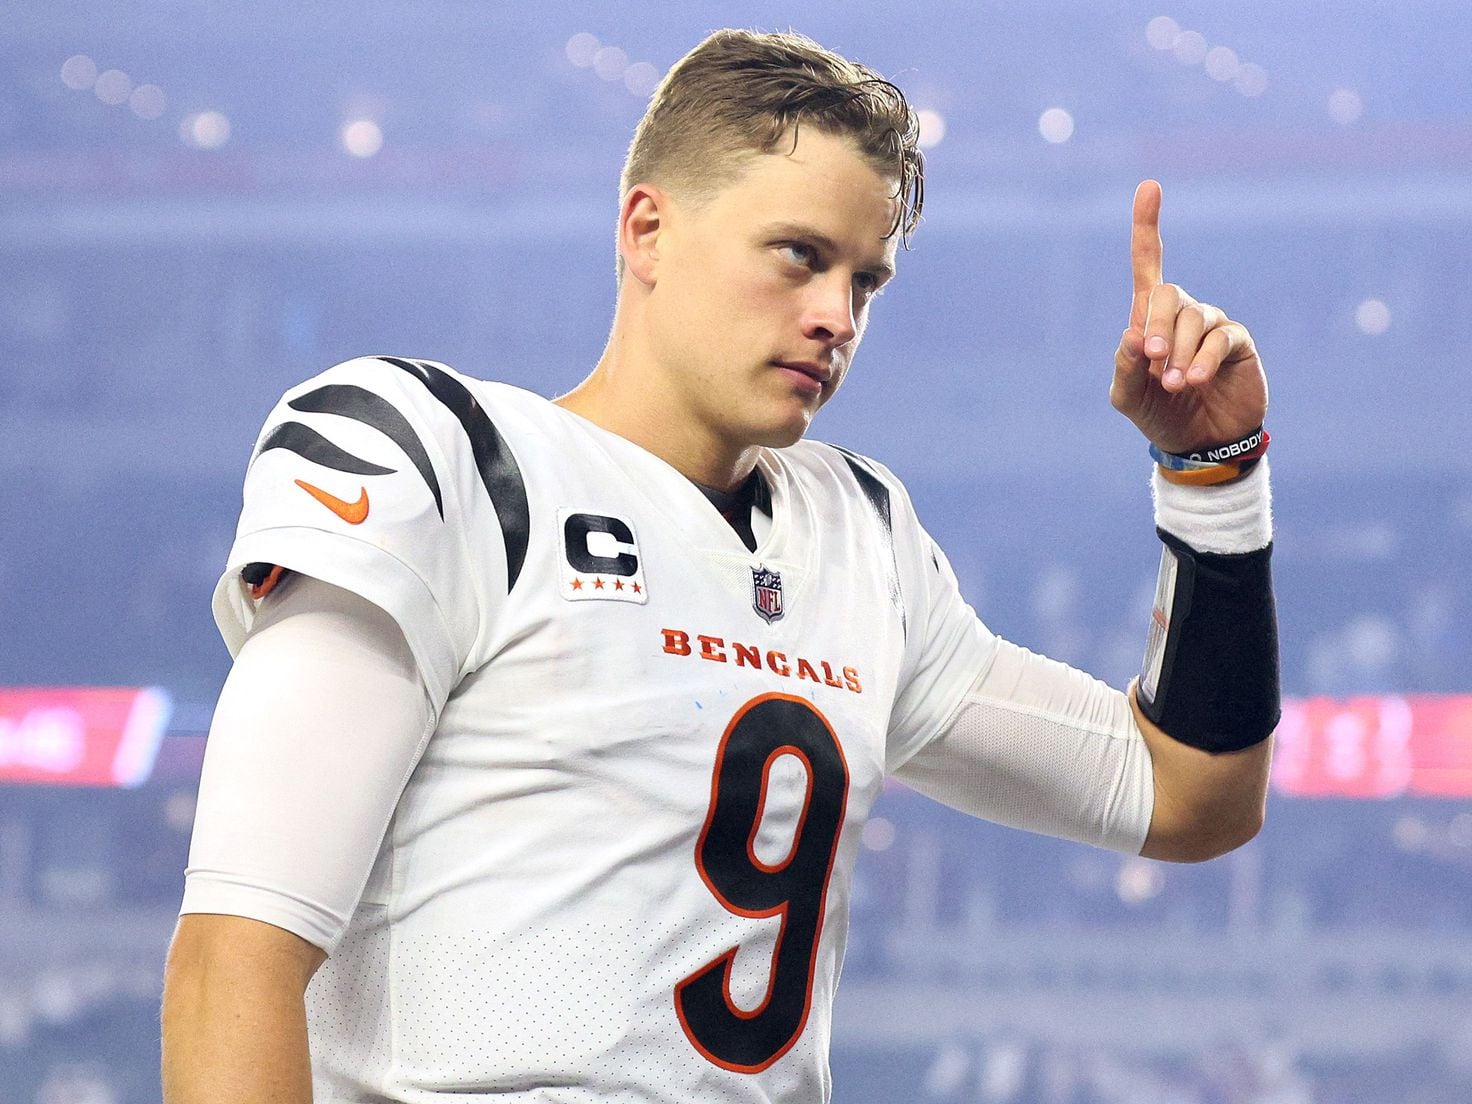 What did the Bengals' Joe Burrow say about his calf after Monday